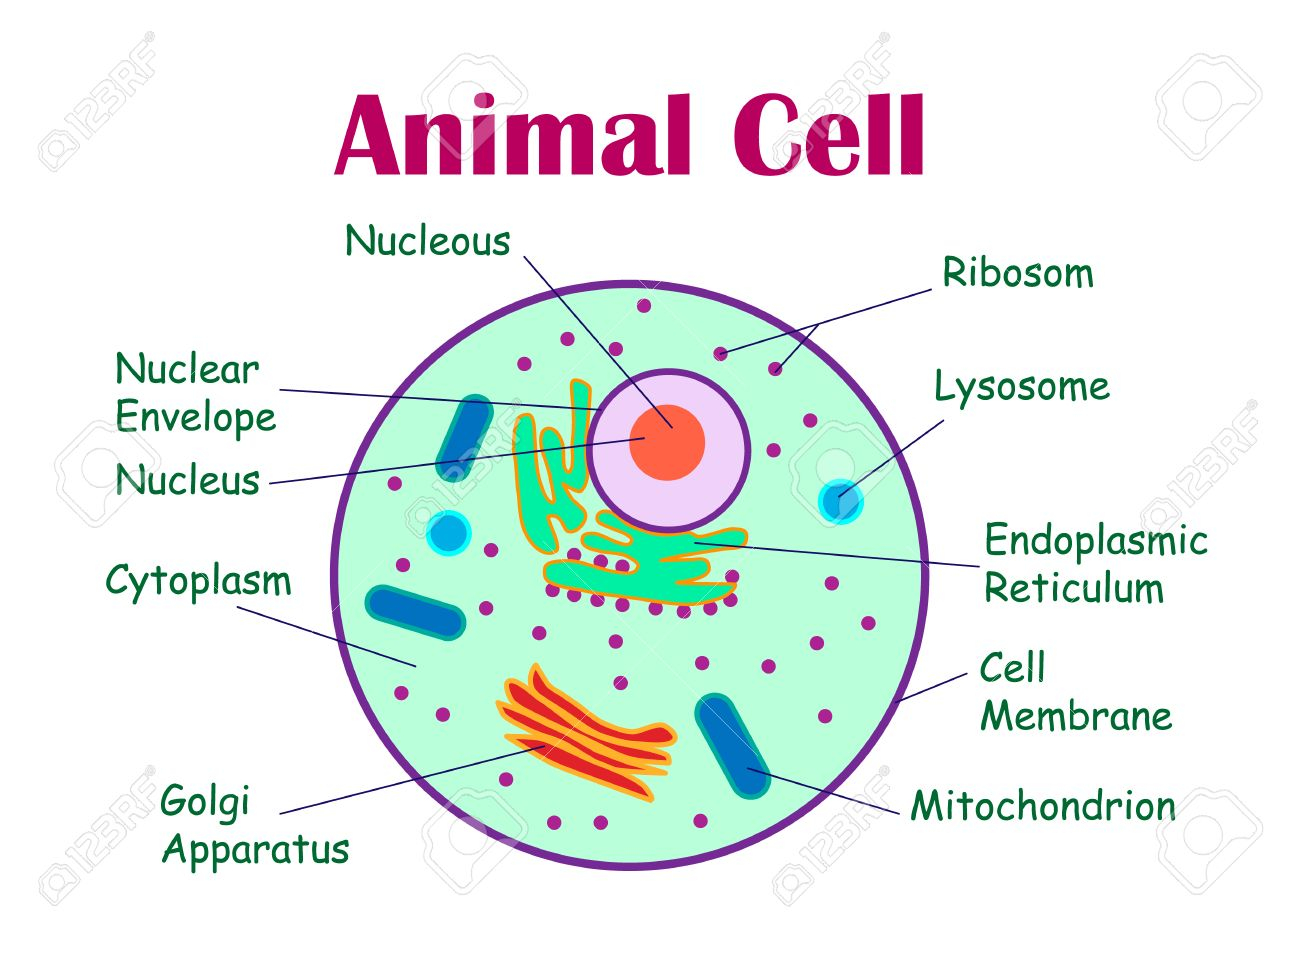 Plant And Animal Cell Diagram Animal Cells And Plant Cells Cell Structure And Functions Class 8